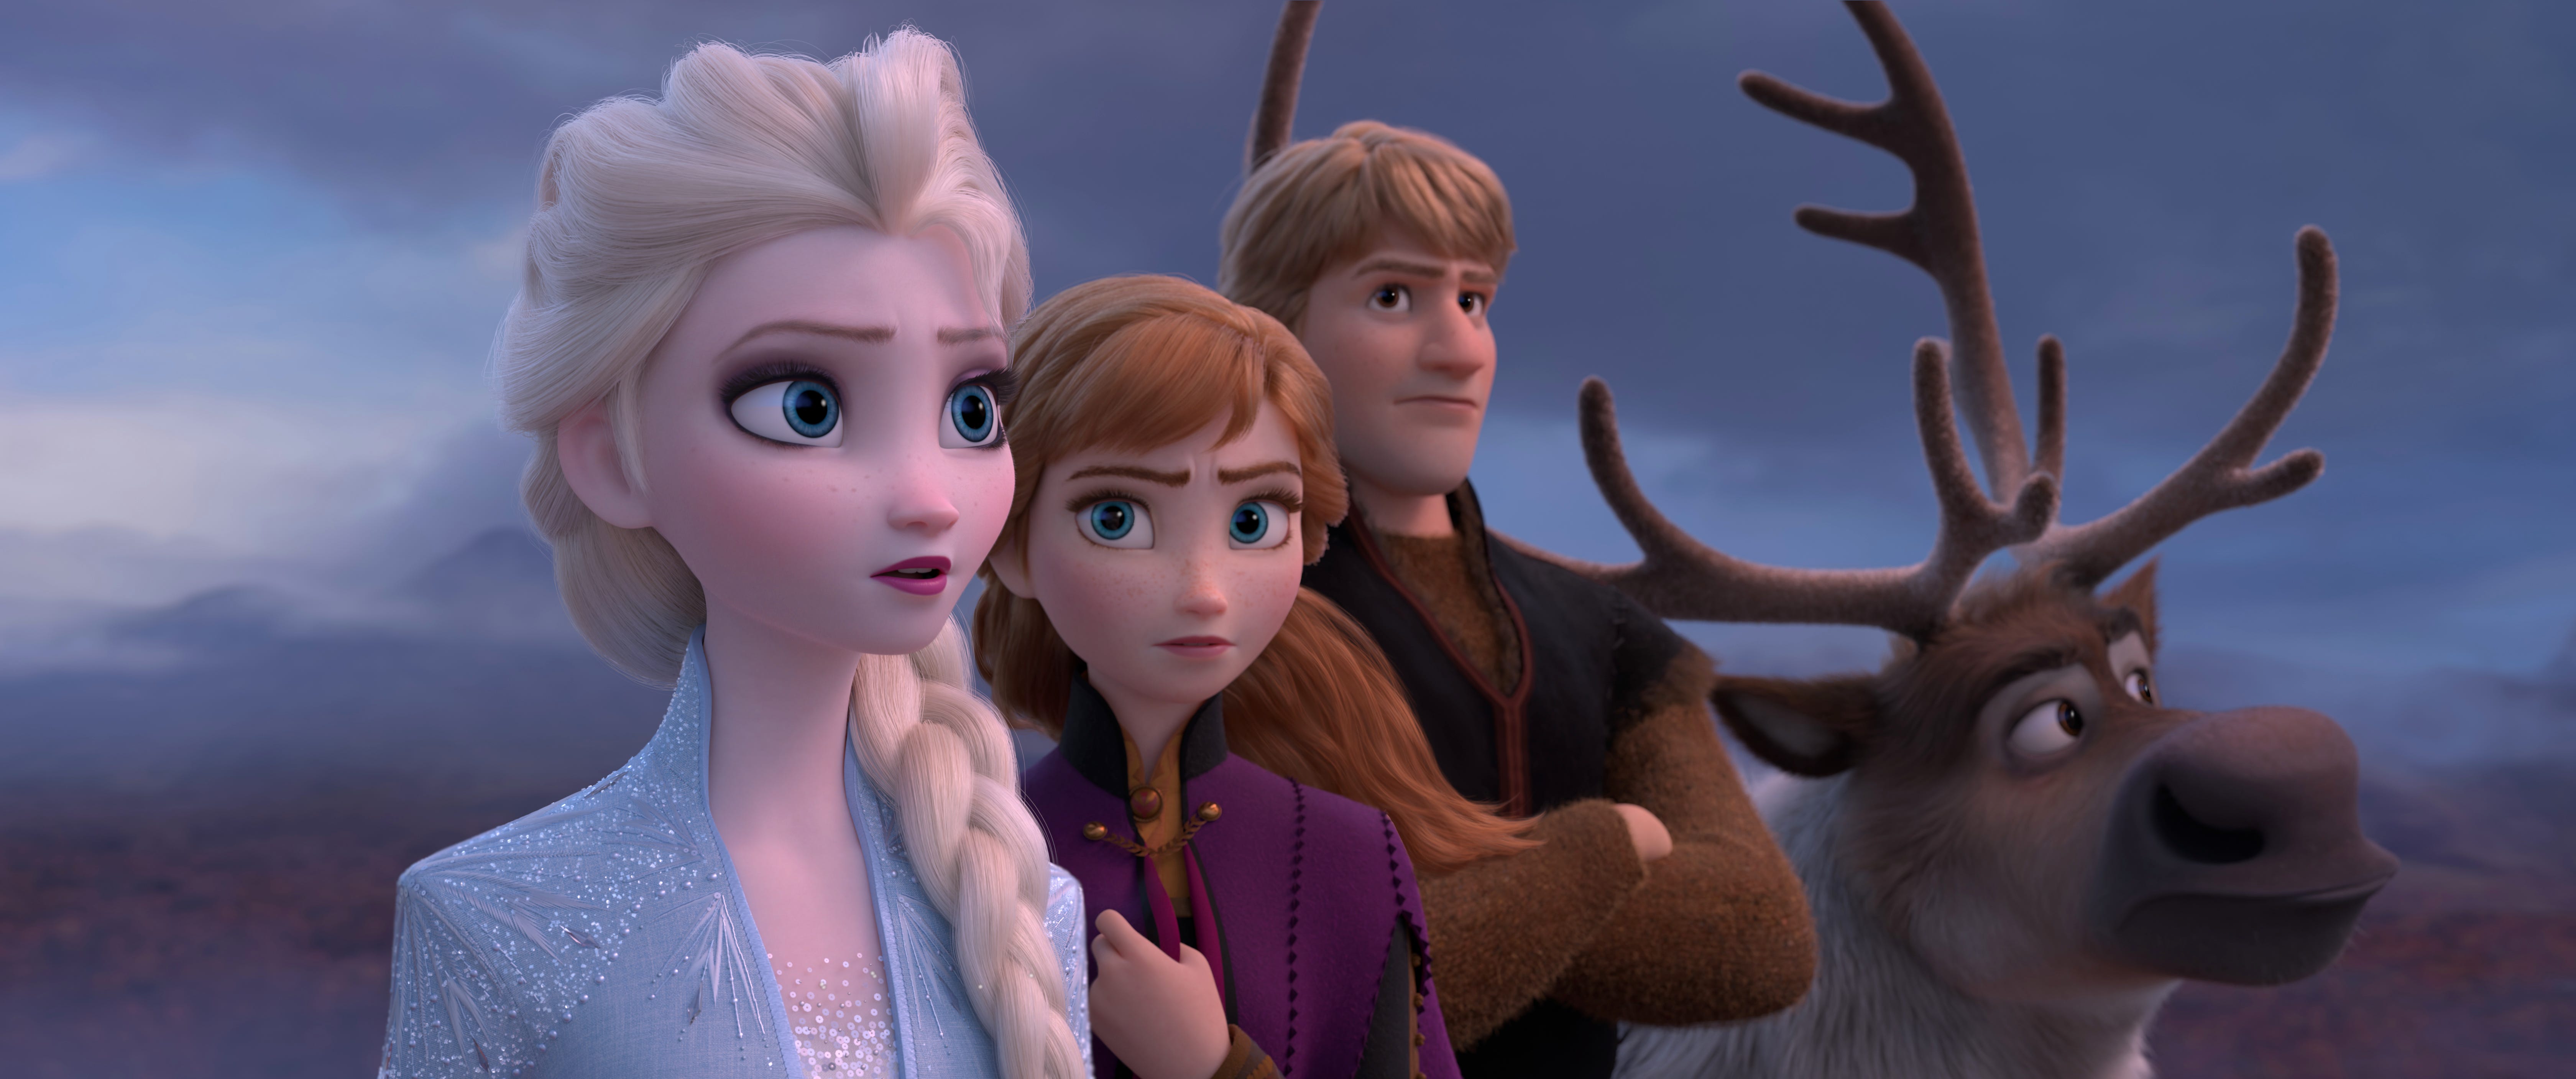 Frozen 2 Every Song In Both Movies Ranked From Worst To Best